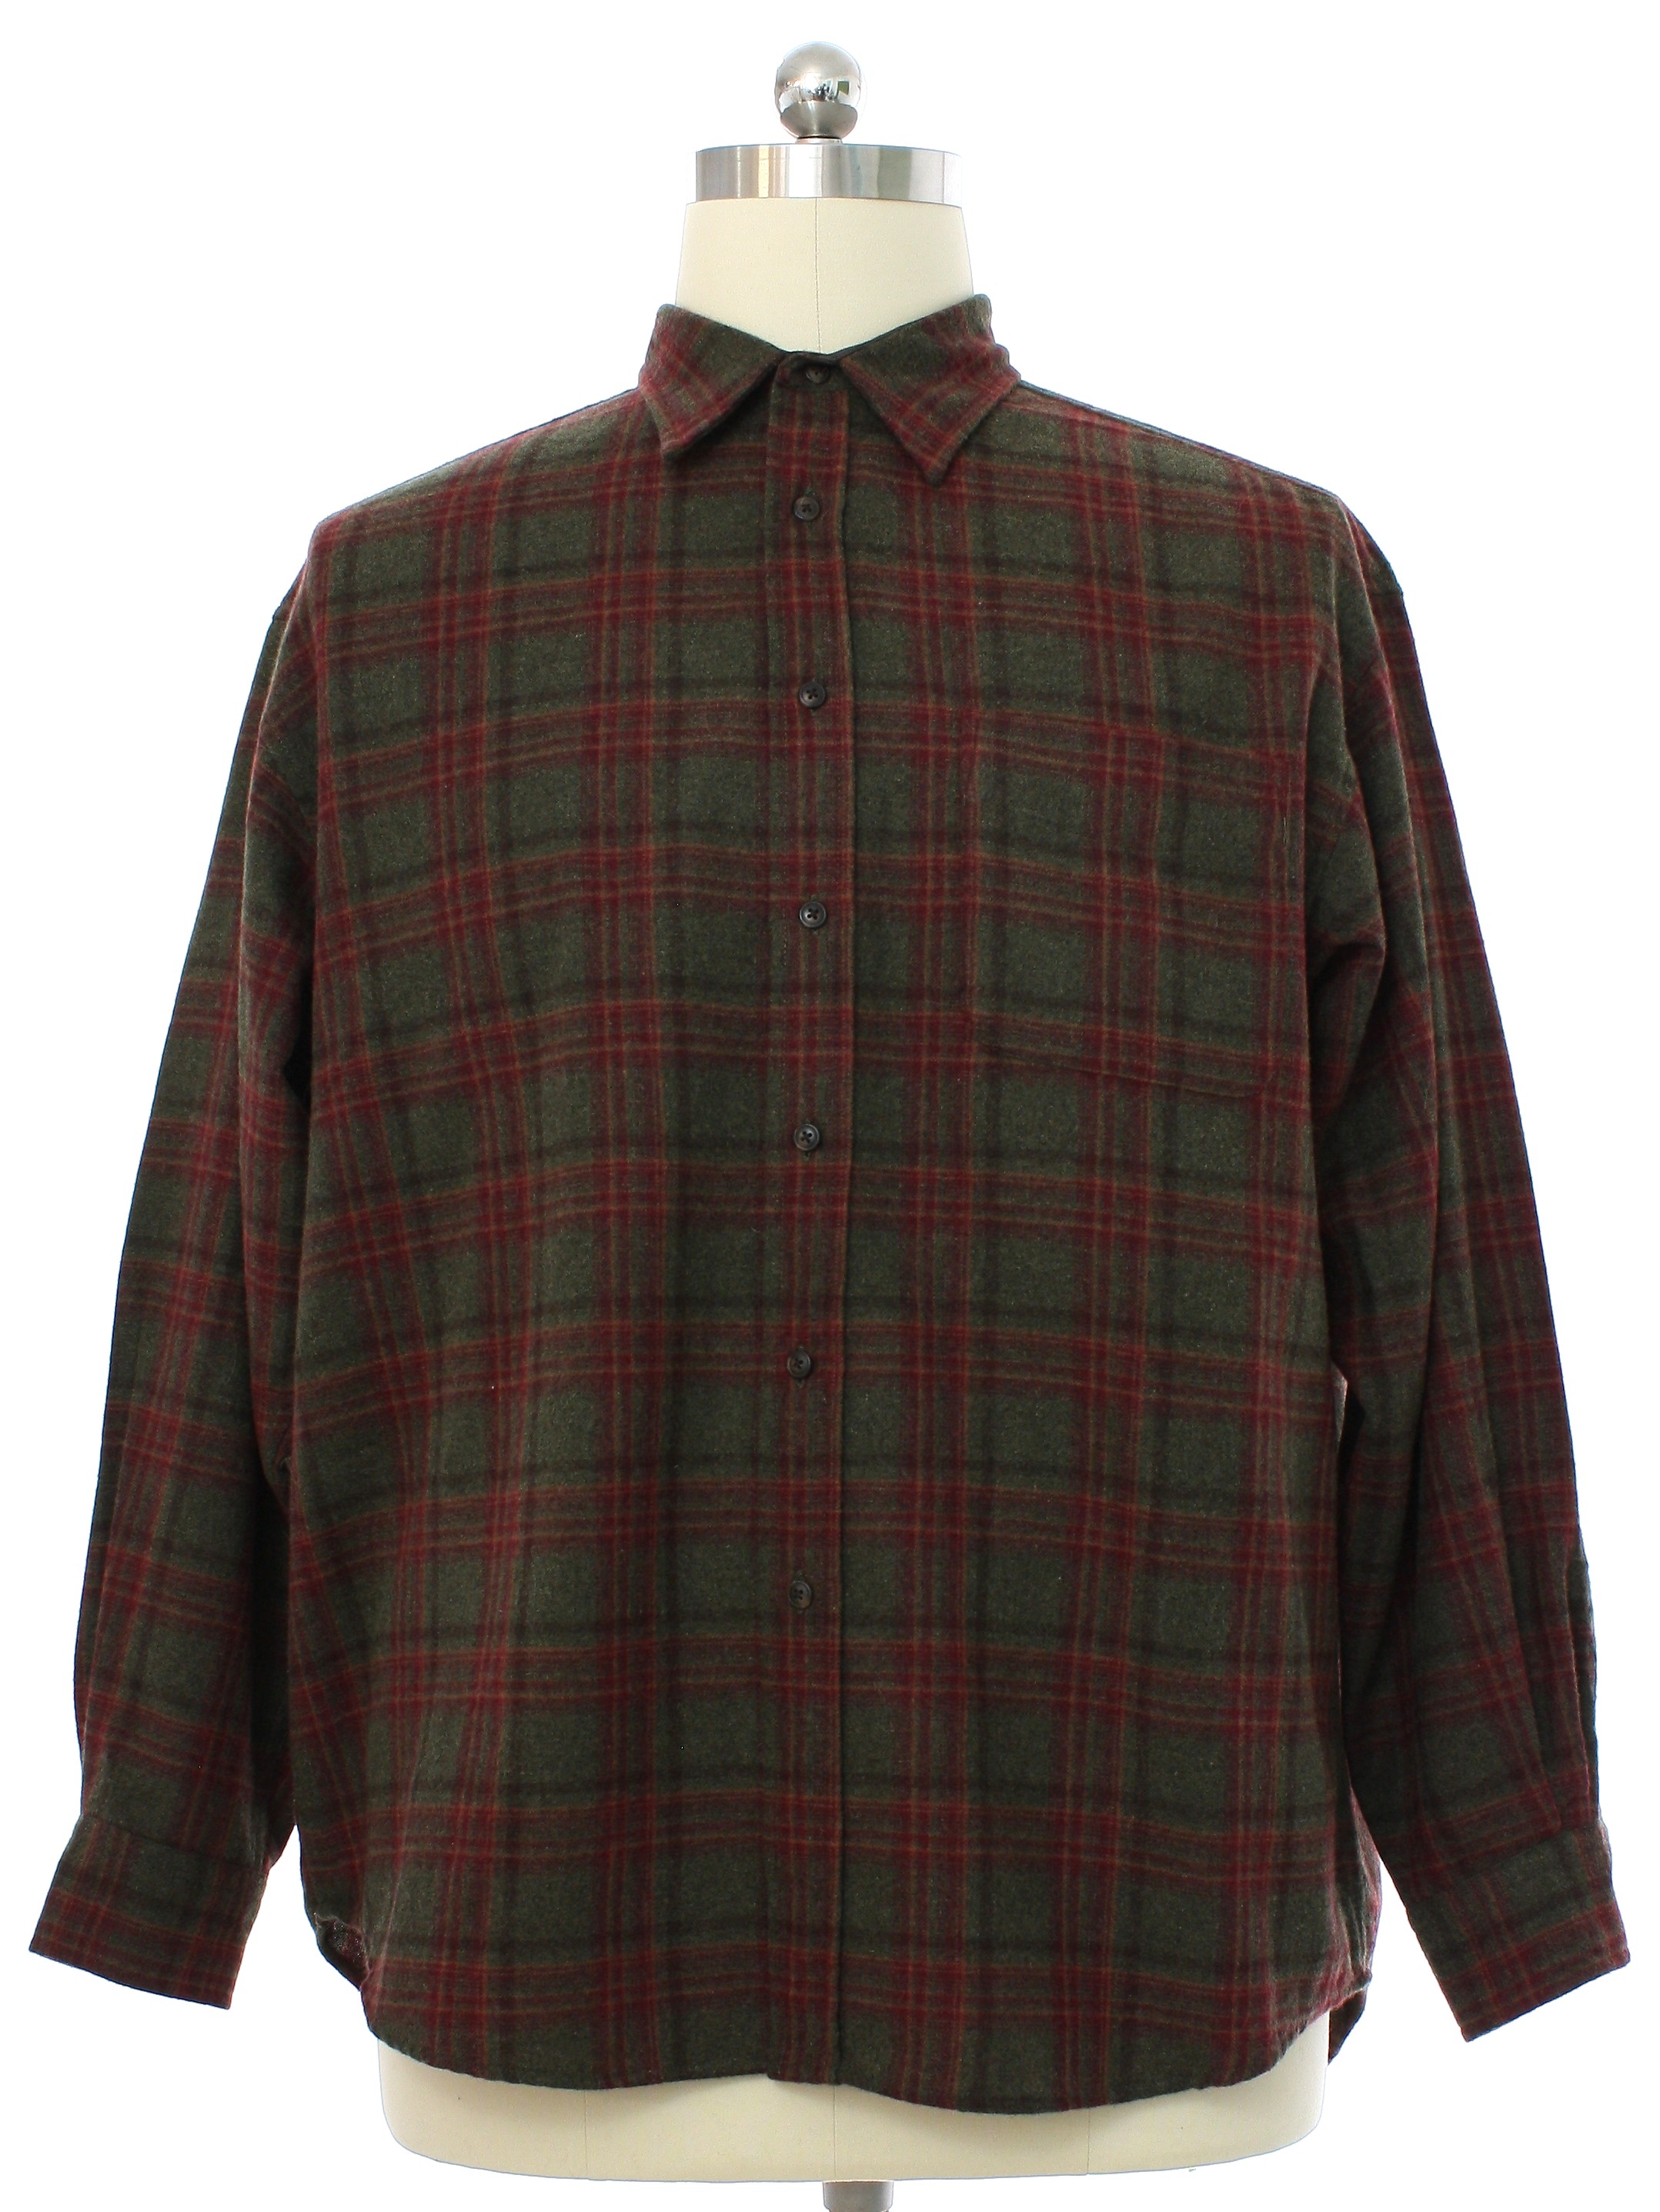 Retro 1990s Shirt: 90s or Newer -Gap- Mens olive green and burgundy red ...